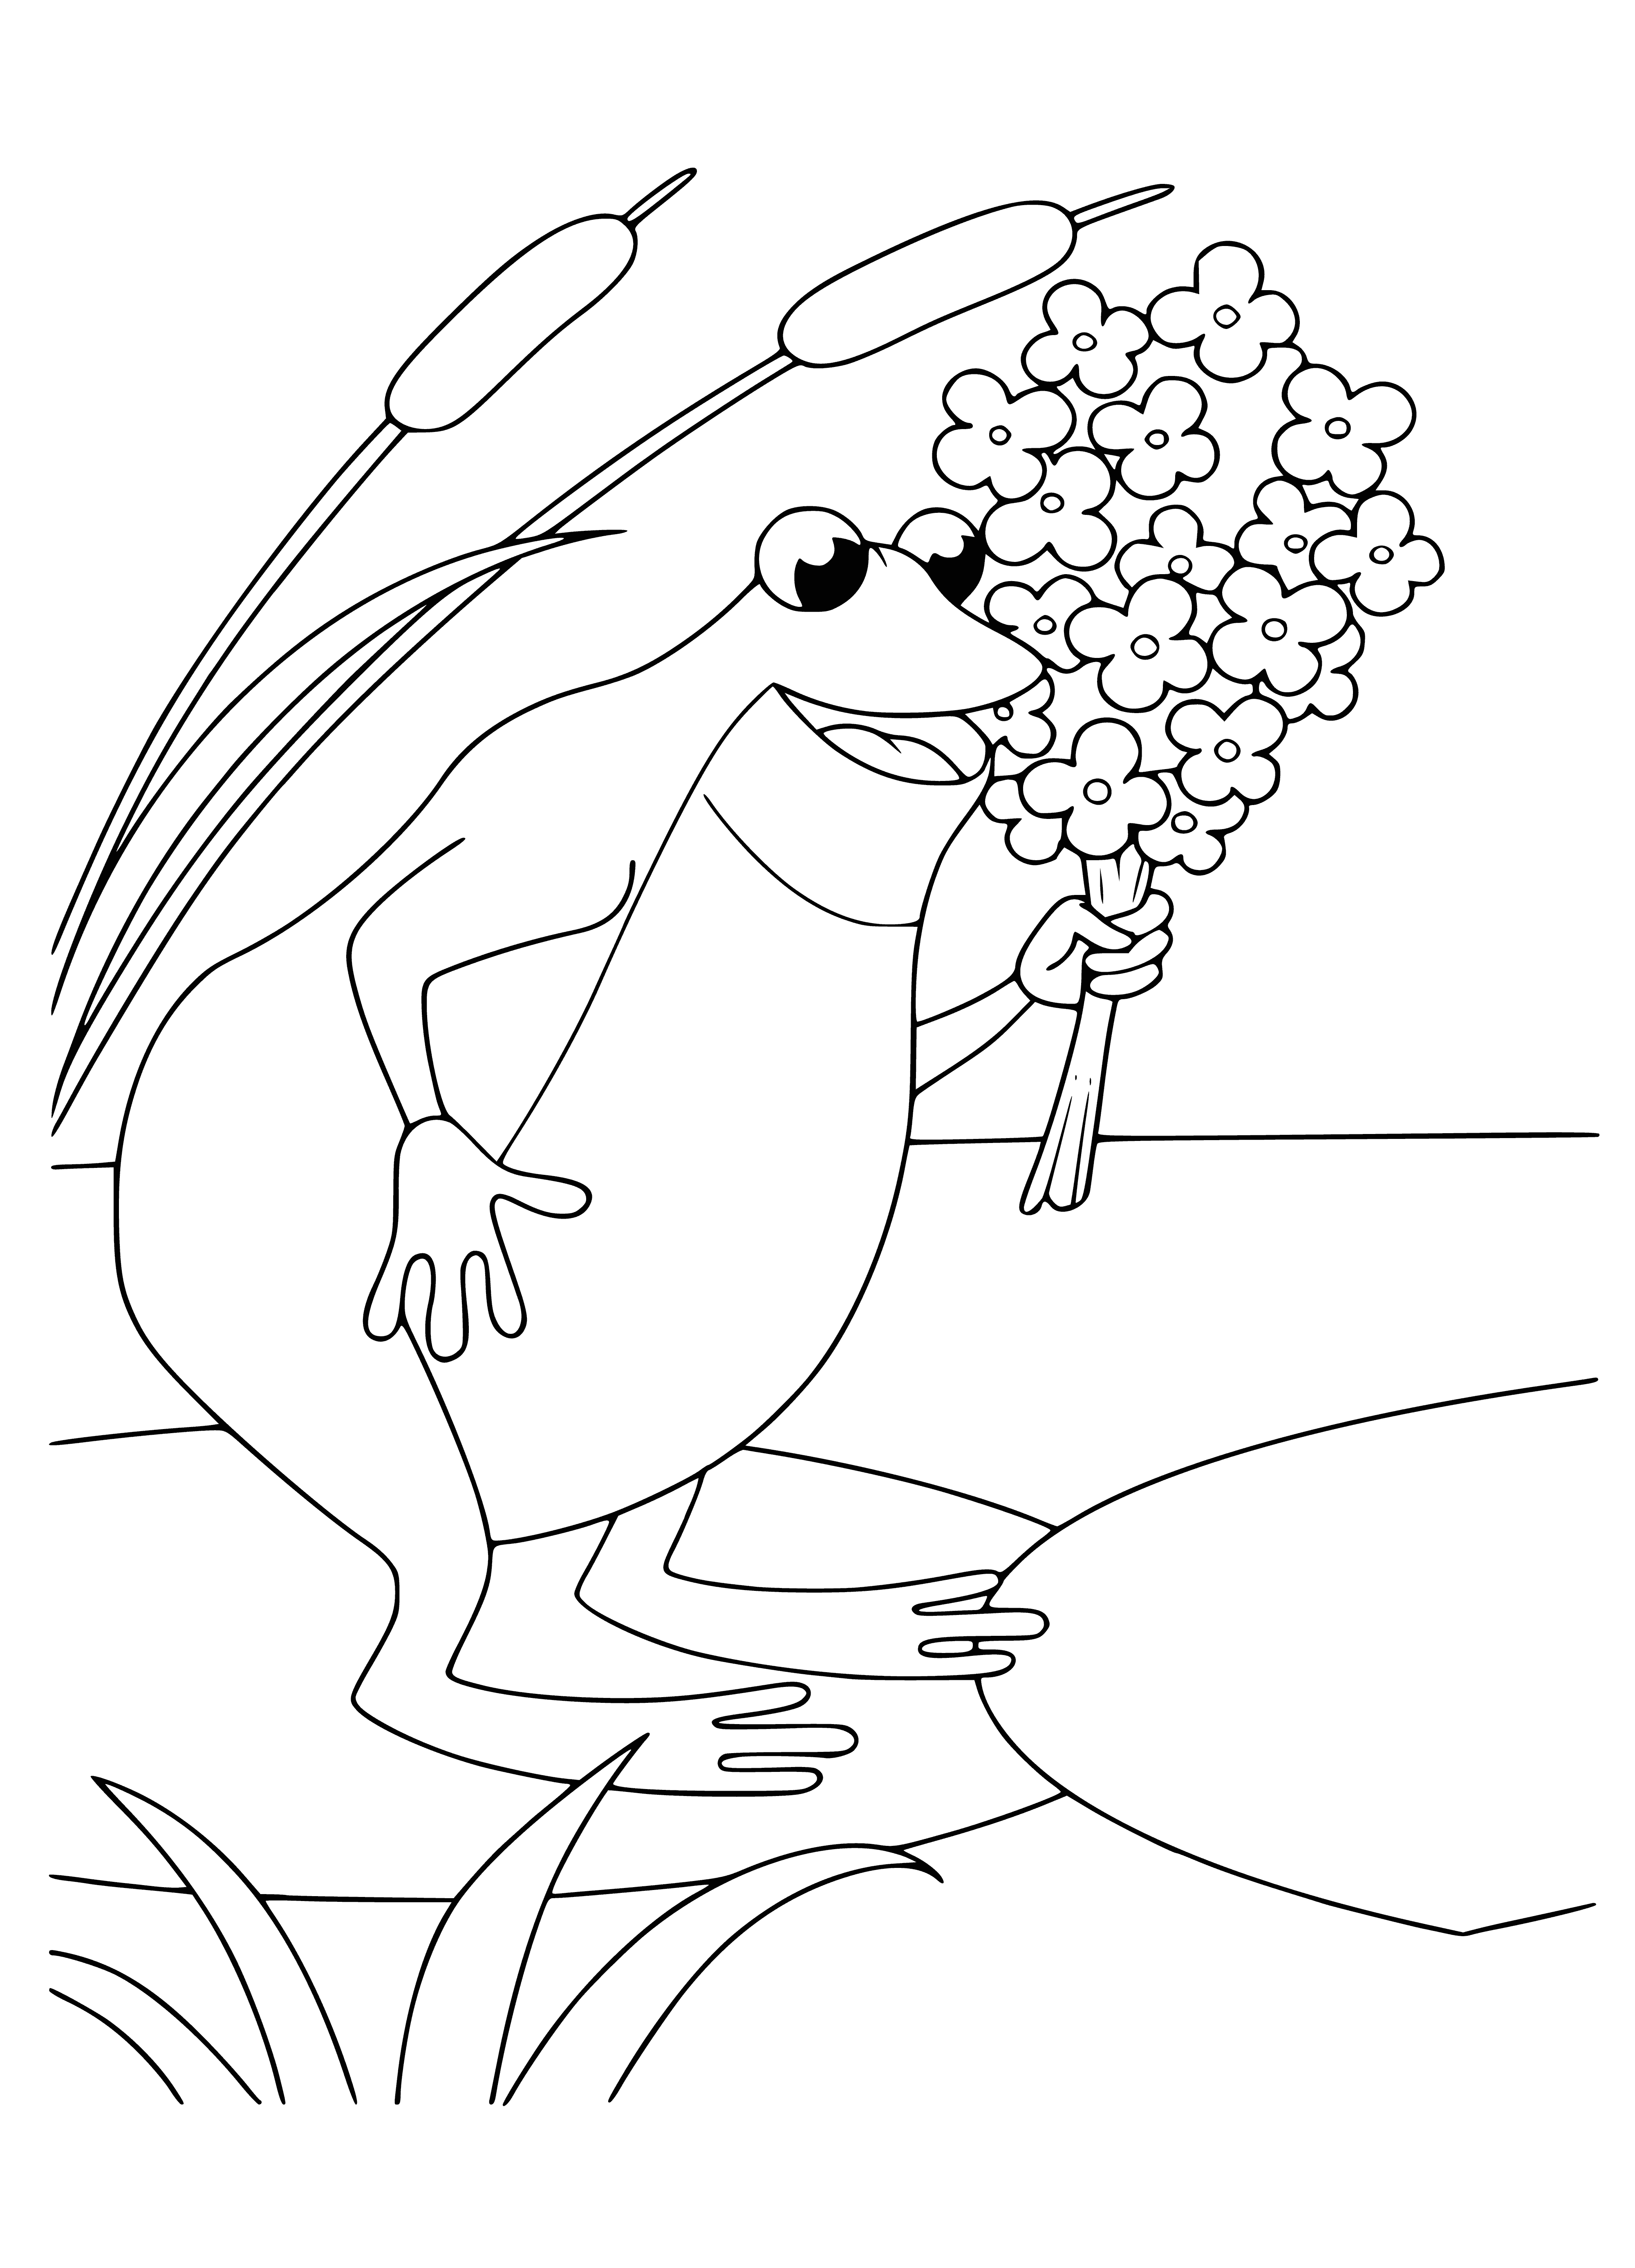 coloring page: Toad holds bouquet as Thumbelina, a small winged girl on a lily pad, looks on.